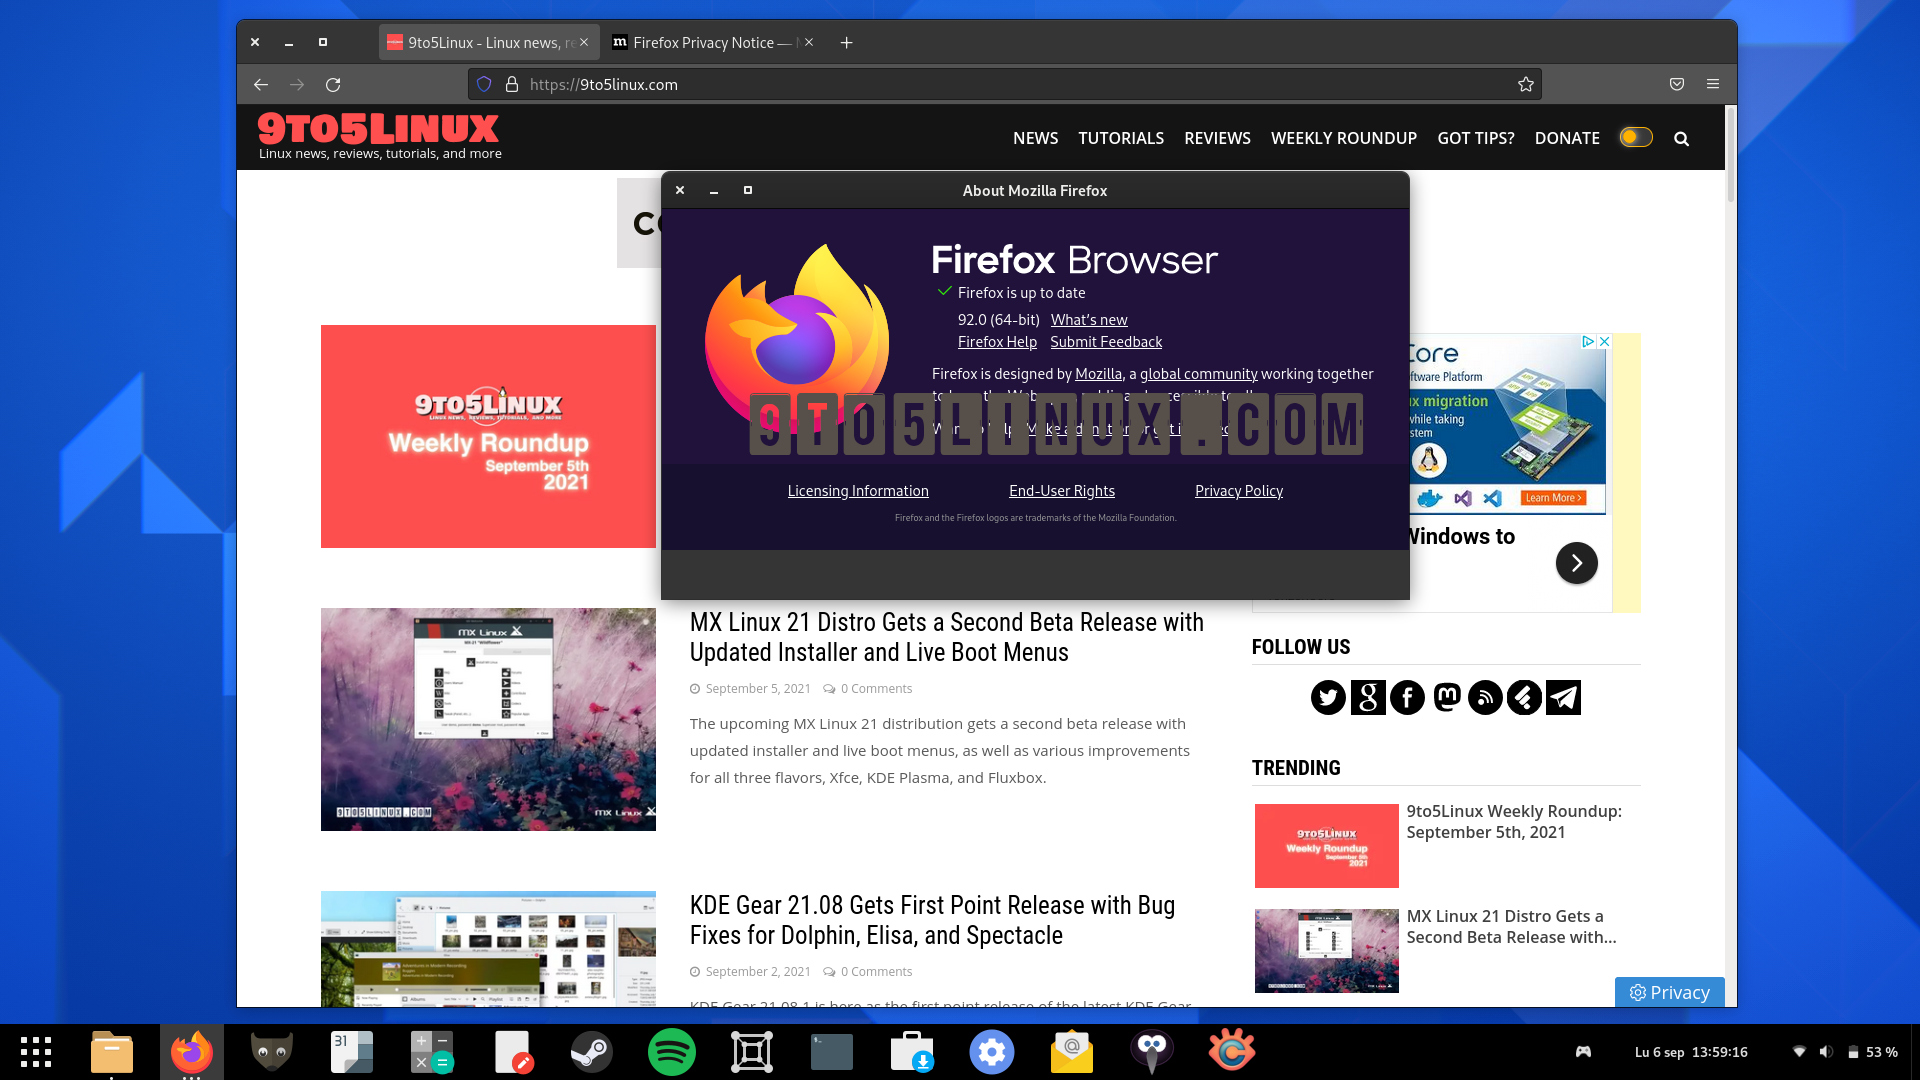 Mozilla Firefox 92 Is Now Available for Download, Here’s What’s New